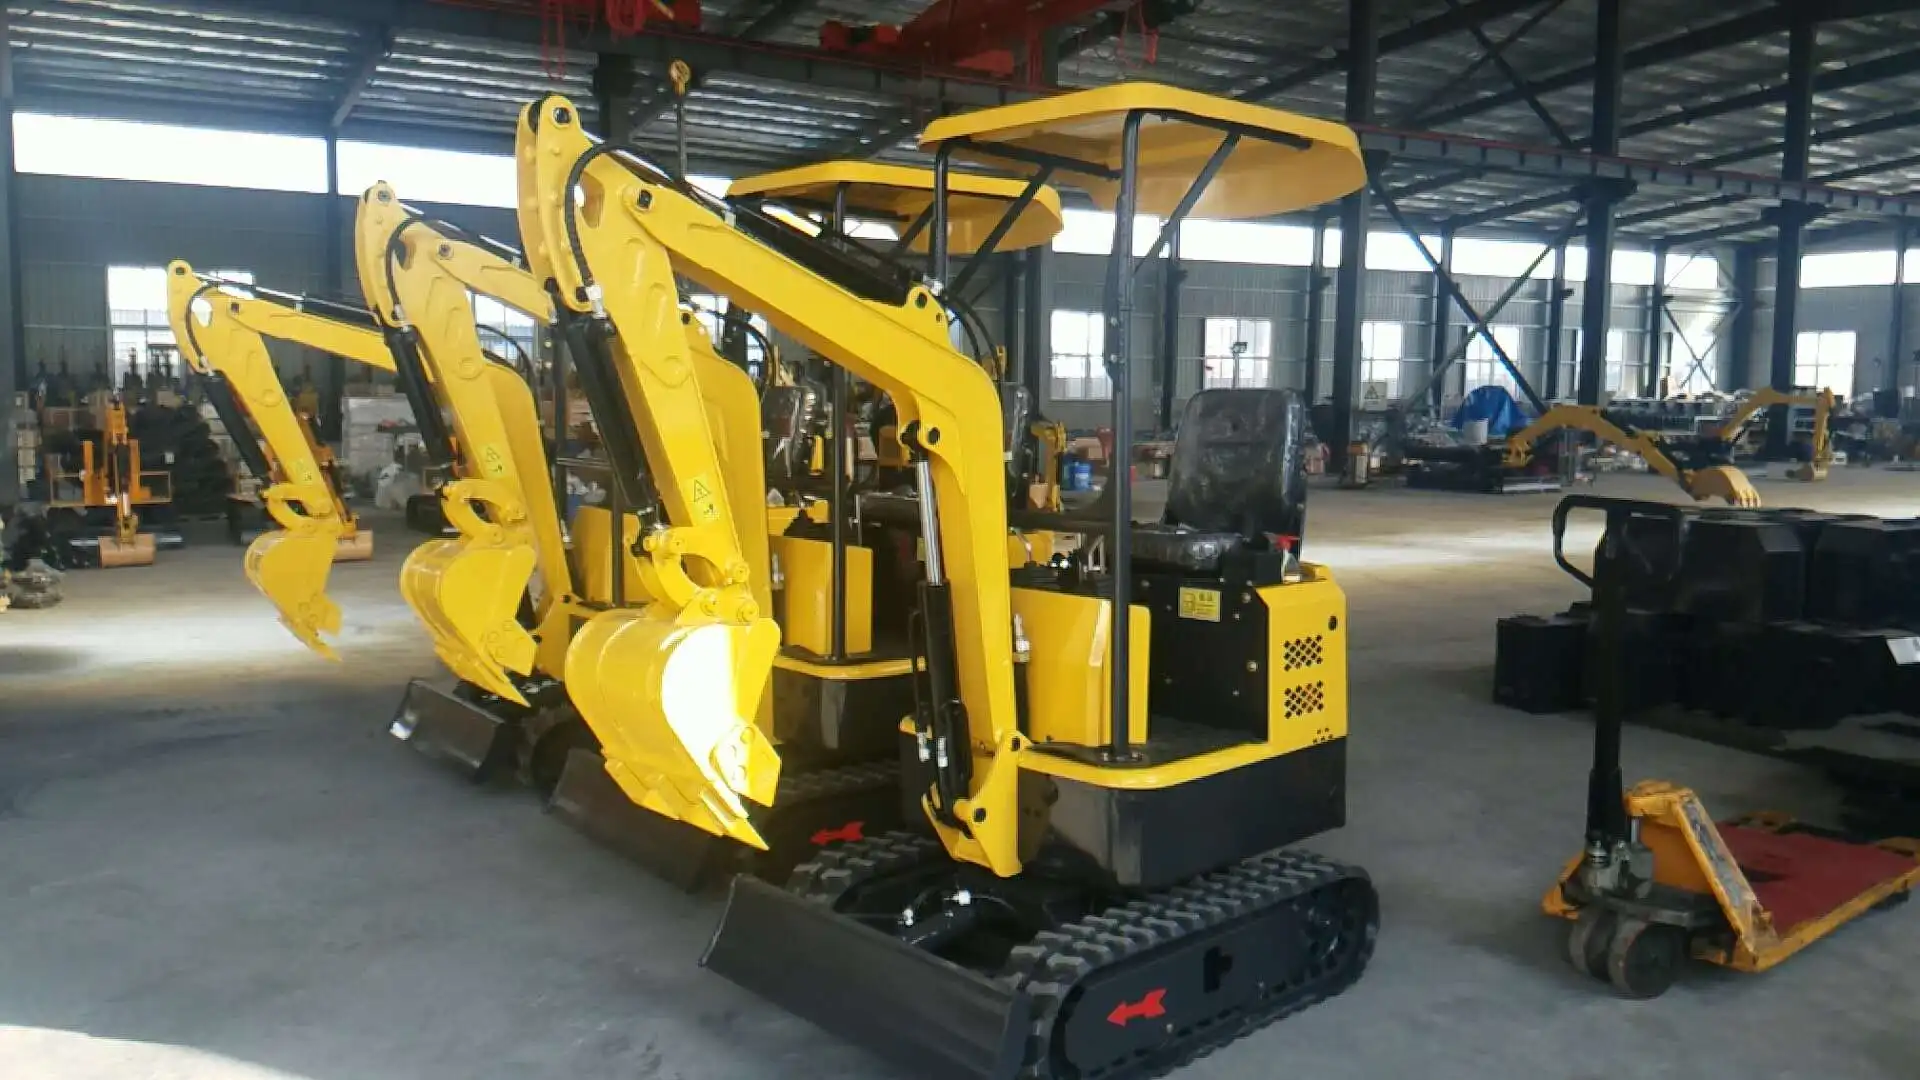 High quality mini digger excavators with cheap prices